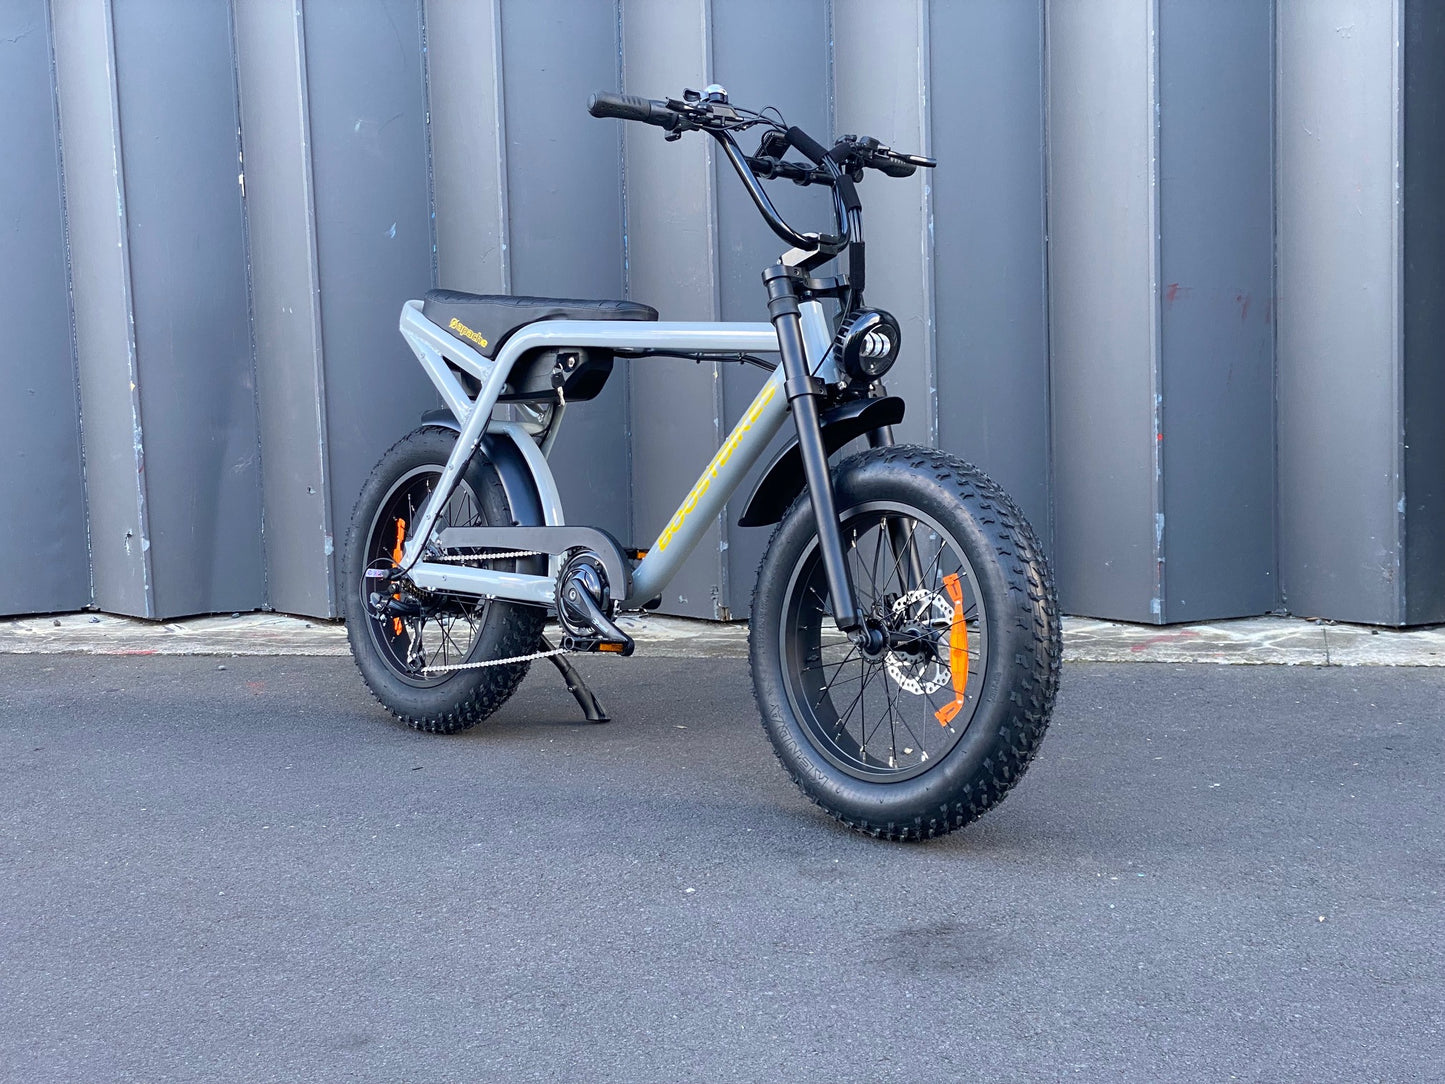 The Apache Electric fat Bike. Urban Explorer meets Retro Cool. From Boostbikes